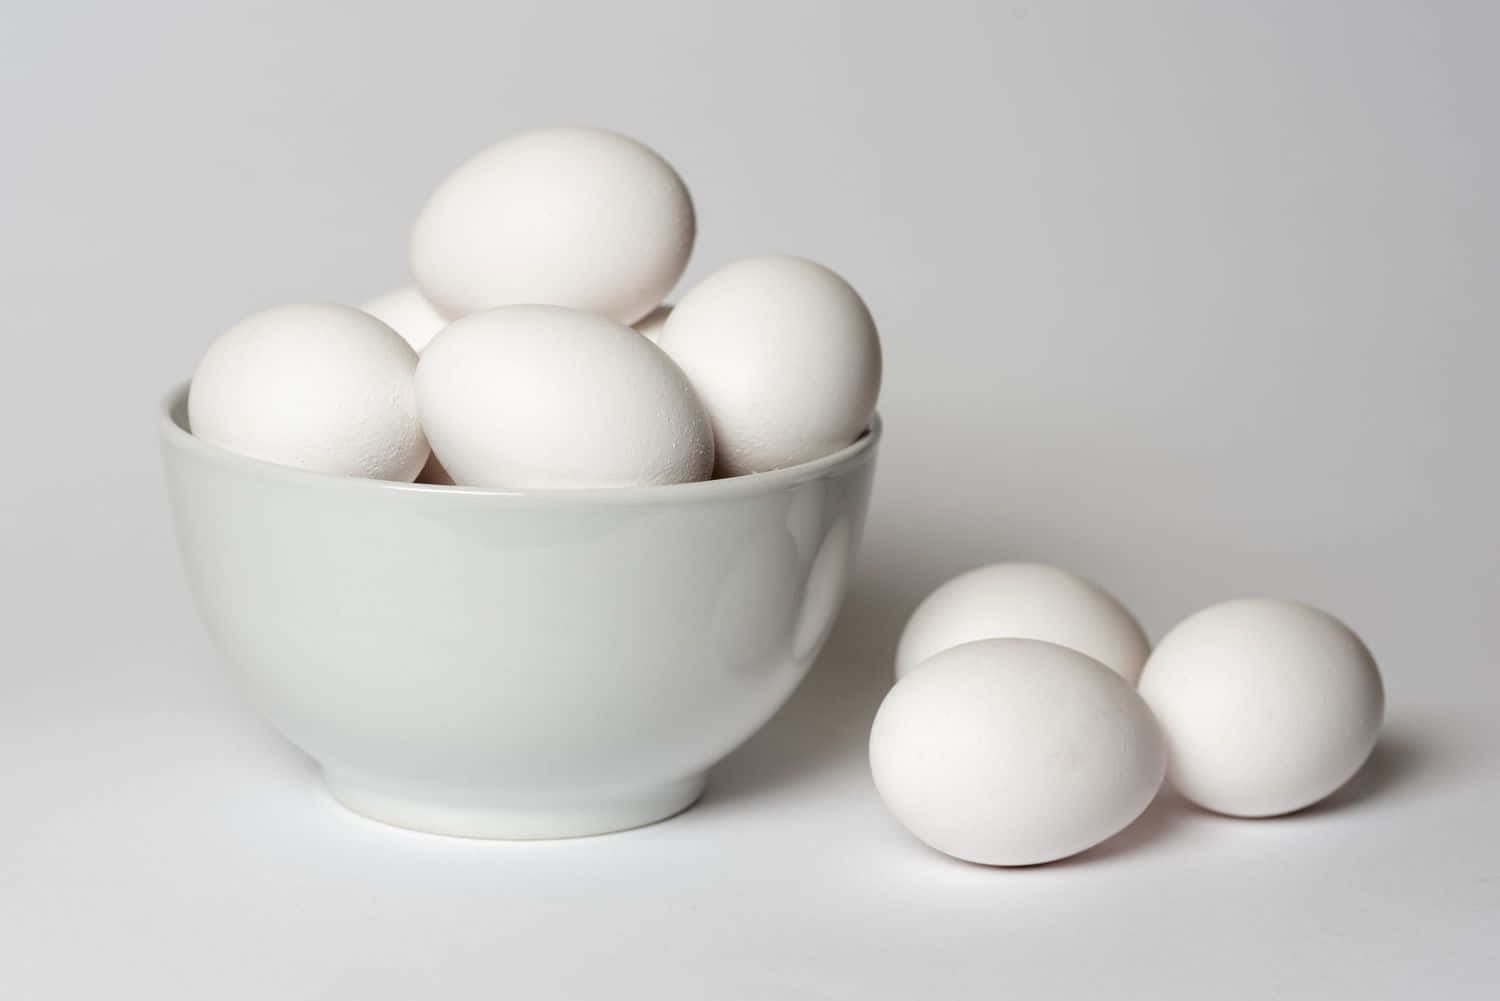 White Eggs In A Bowl On A White Background